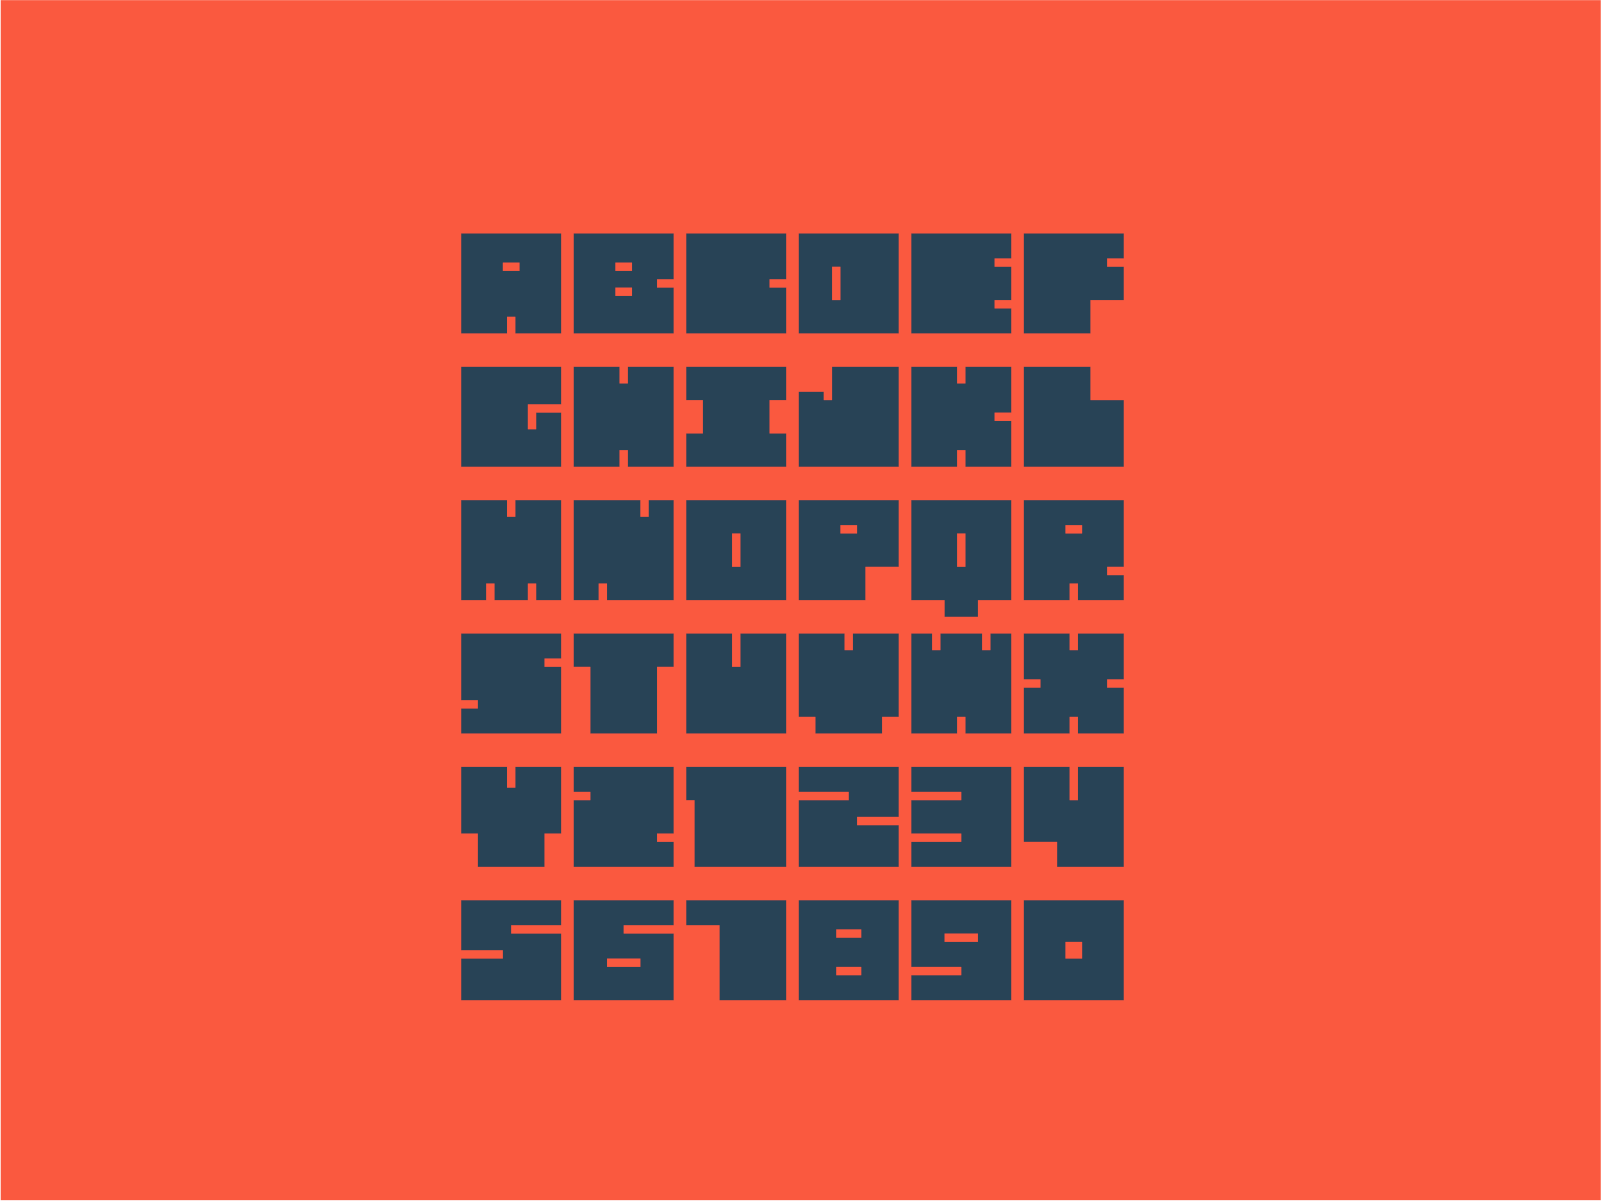 Alphanumeric samples from the new SuperHeavy font.